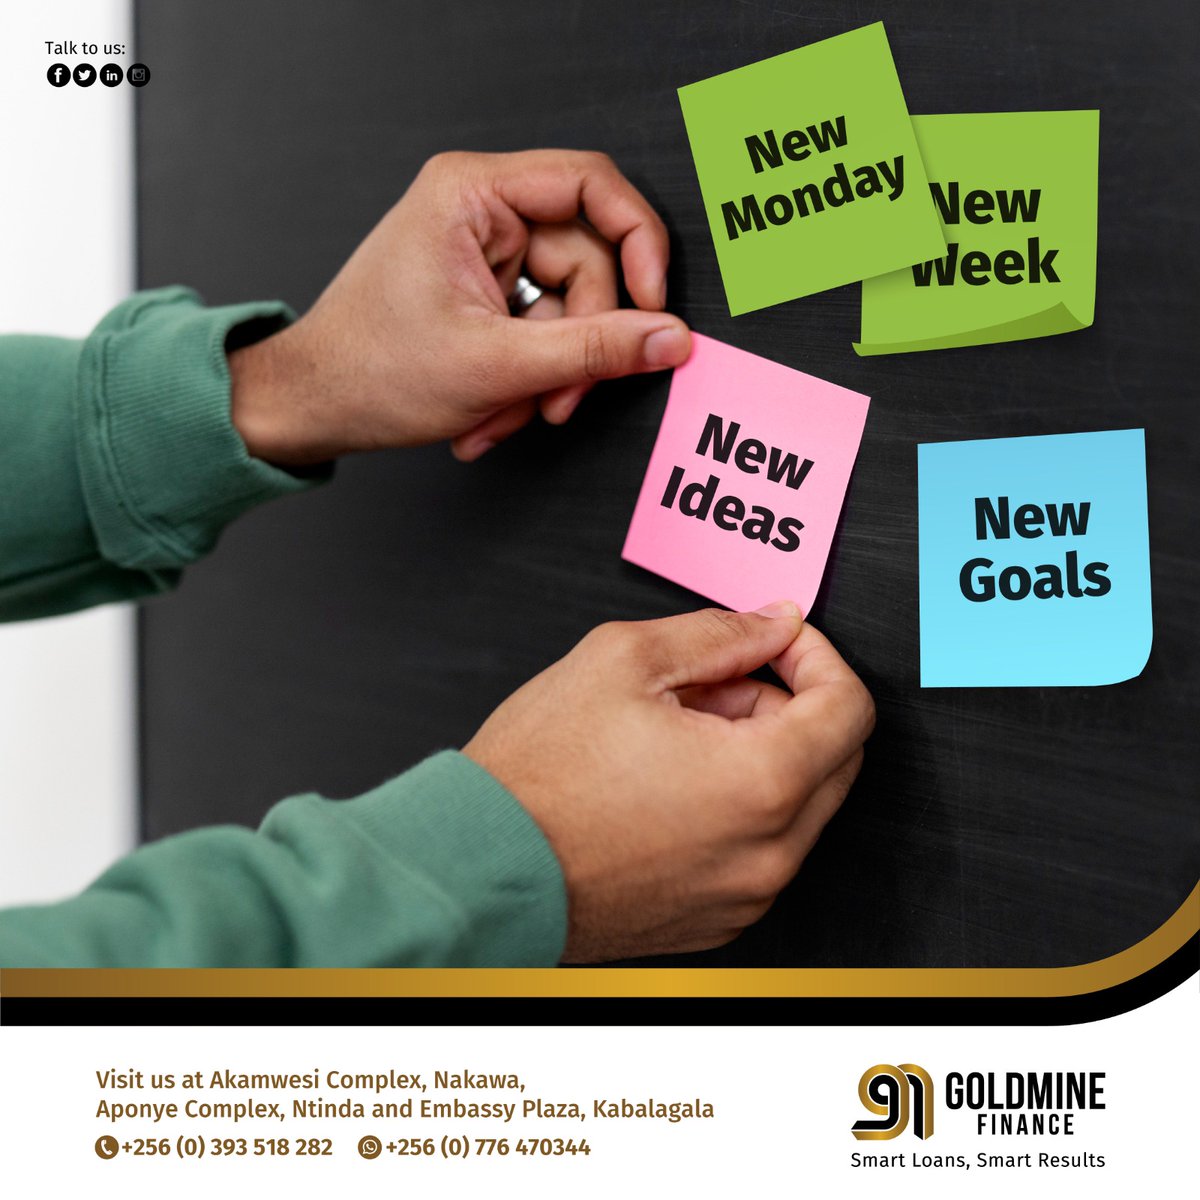 Monday is the start of a #newweek with brand-new #opportunities to enjoy all that life has to offer. Let's make your #financialgoals a reality today. 💰 

#mondaymotivation #SmartLoansSmartResults
#BusinessAndPersonalLoans
#OfficialSponsor
#GoforGold
#OBONATO
#JTJaguars